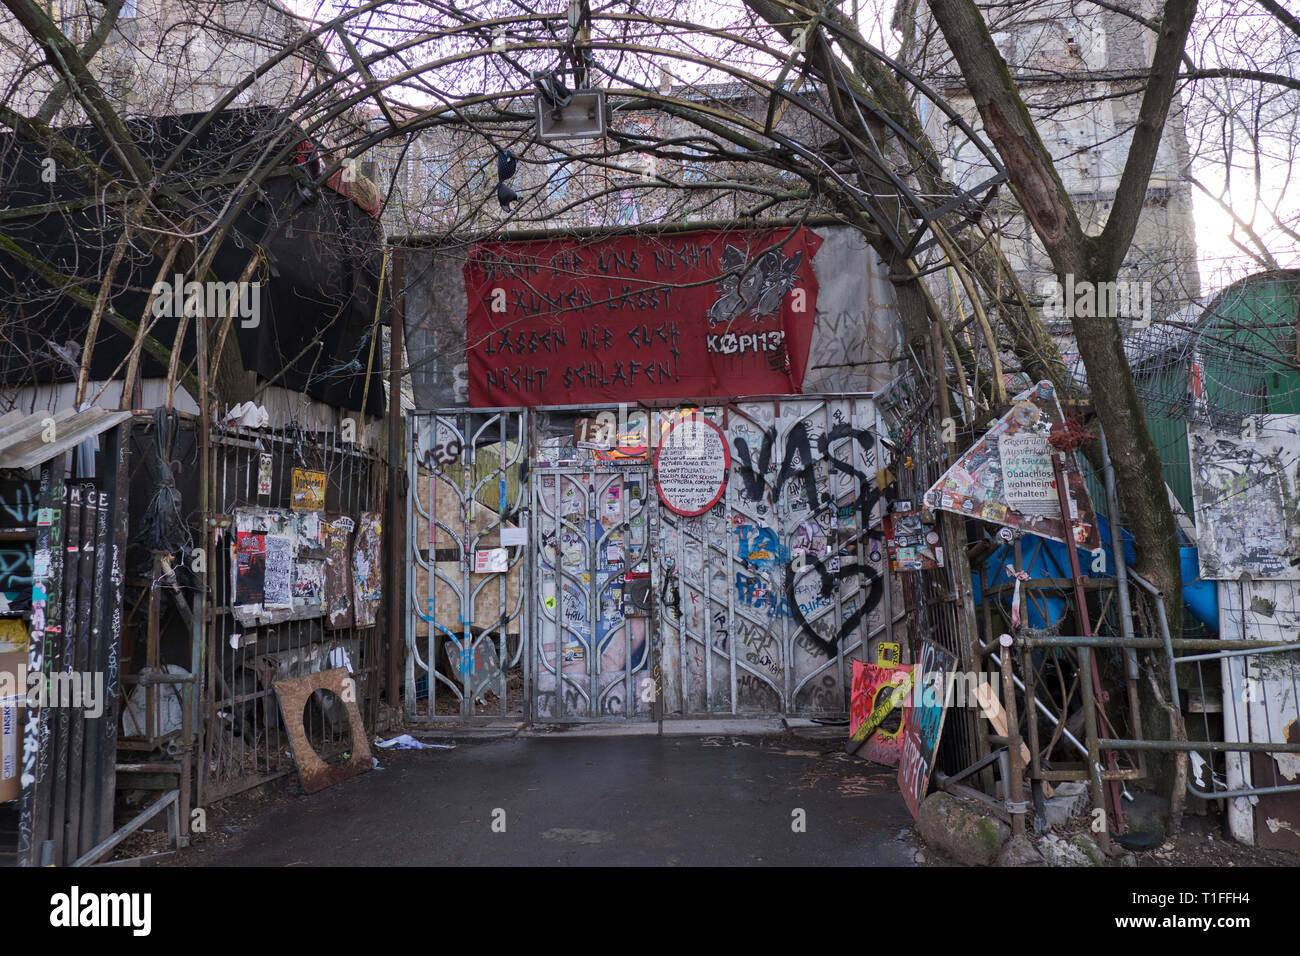 Squatters camp in East Berlin Germany Stock Photo